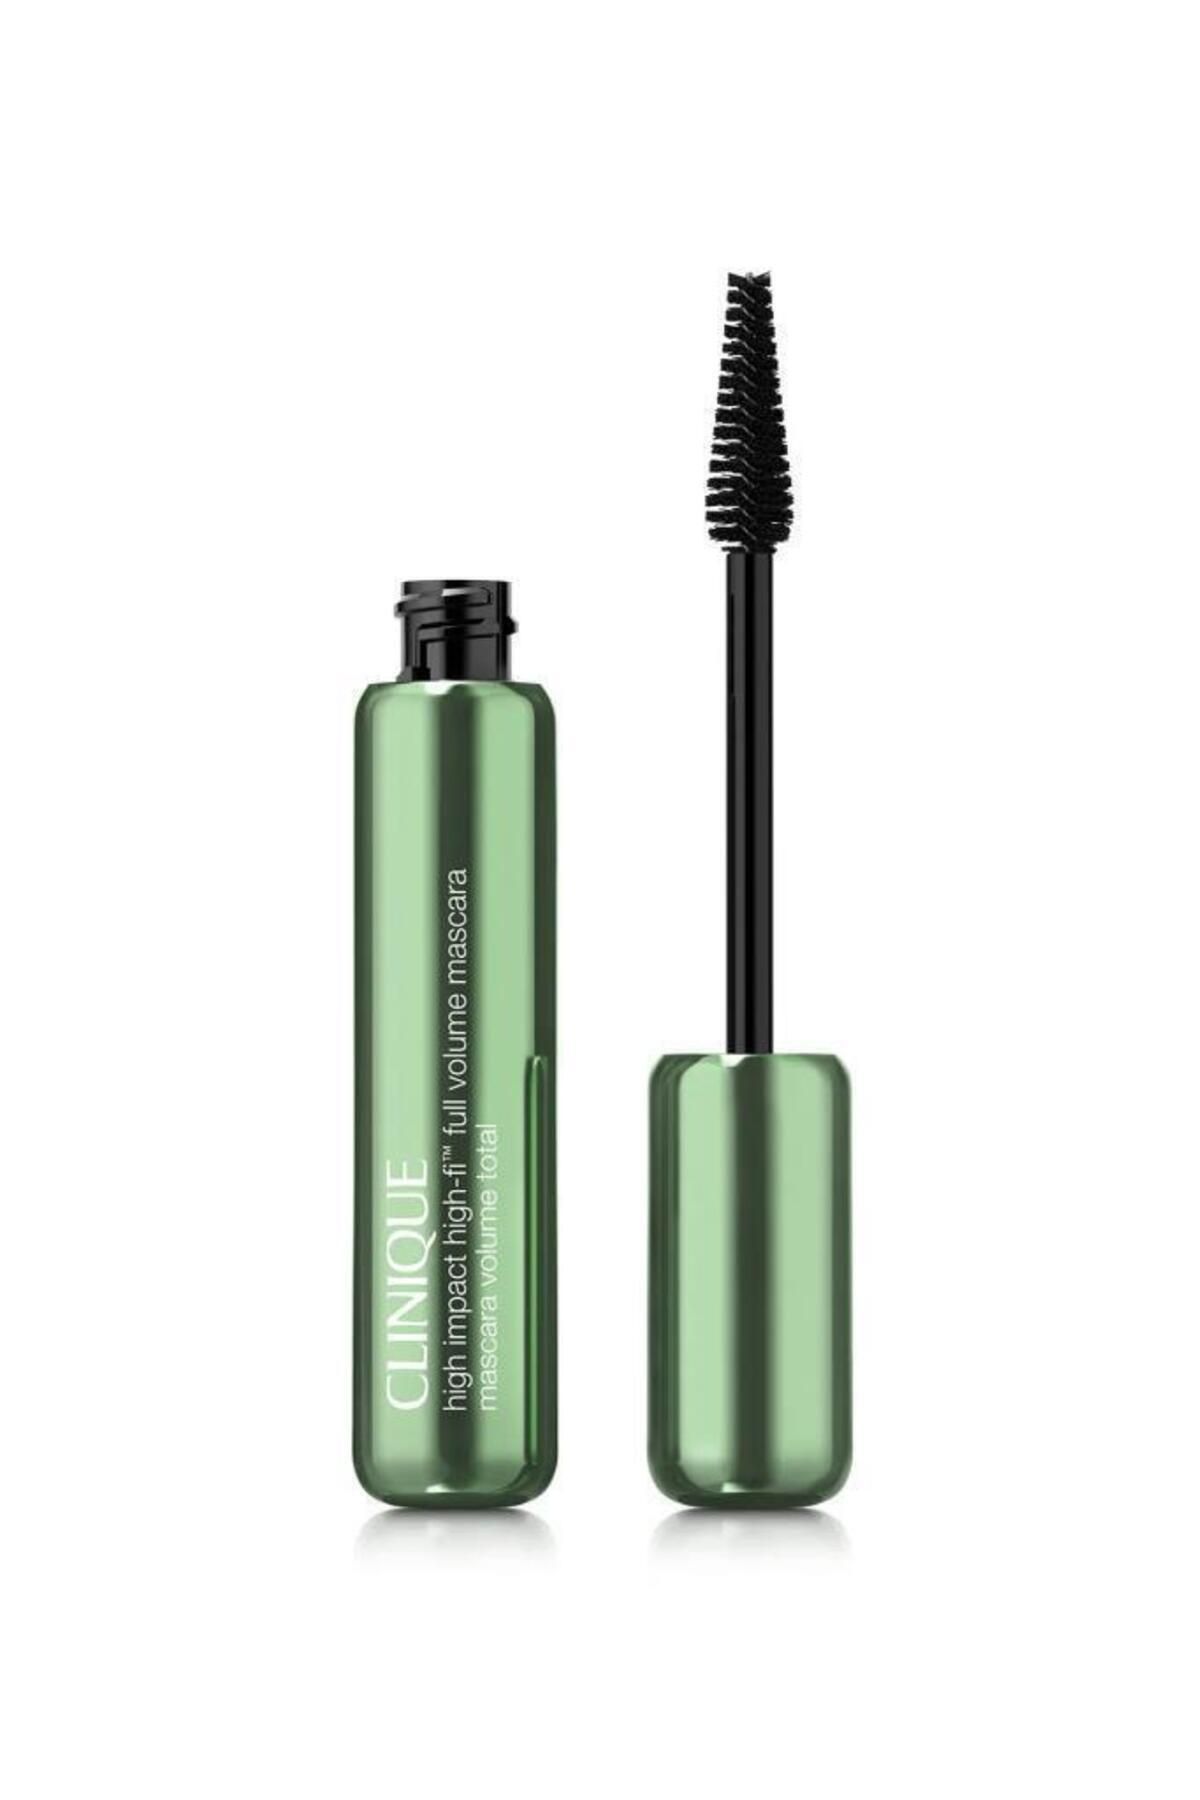 Clinique HİGH IMPACT HİGH-Fİ FULL VOLUME MASCARA 01 WİTH CURLİNG & LİFTİNG EFFECT PSSN1901